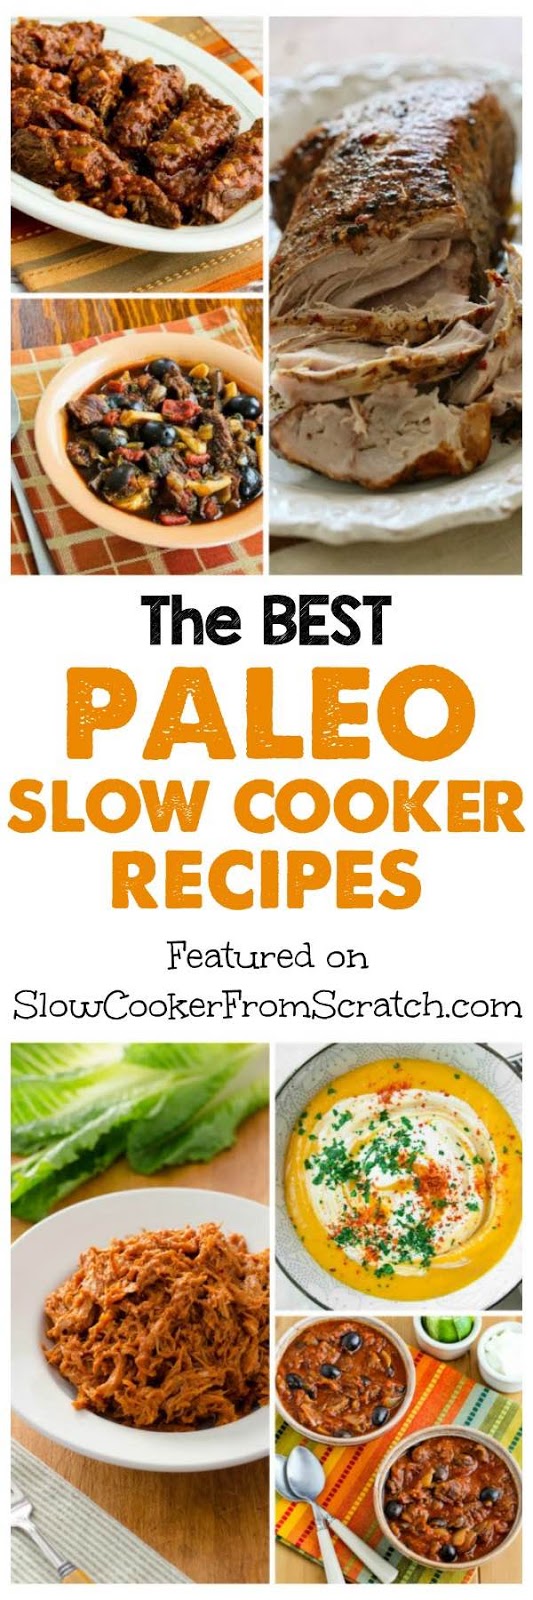 The BEST Paleo Slow Cooker Recipes | Slow Cooker or ...